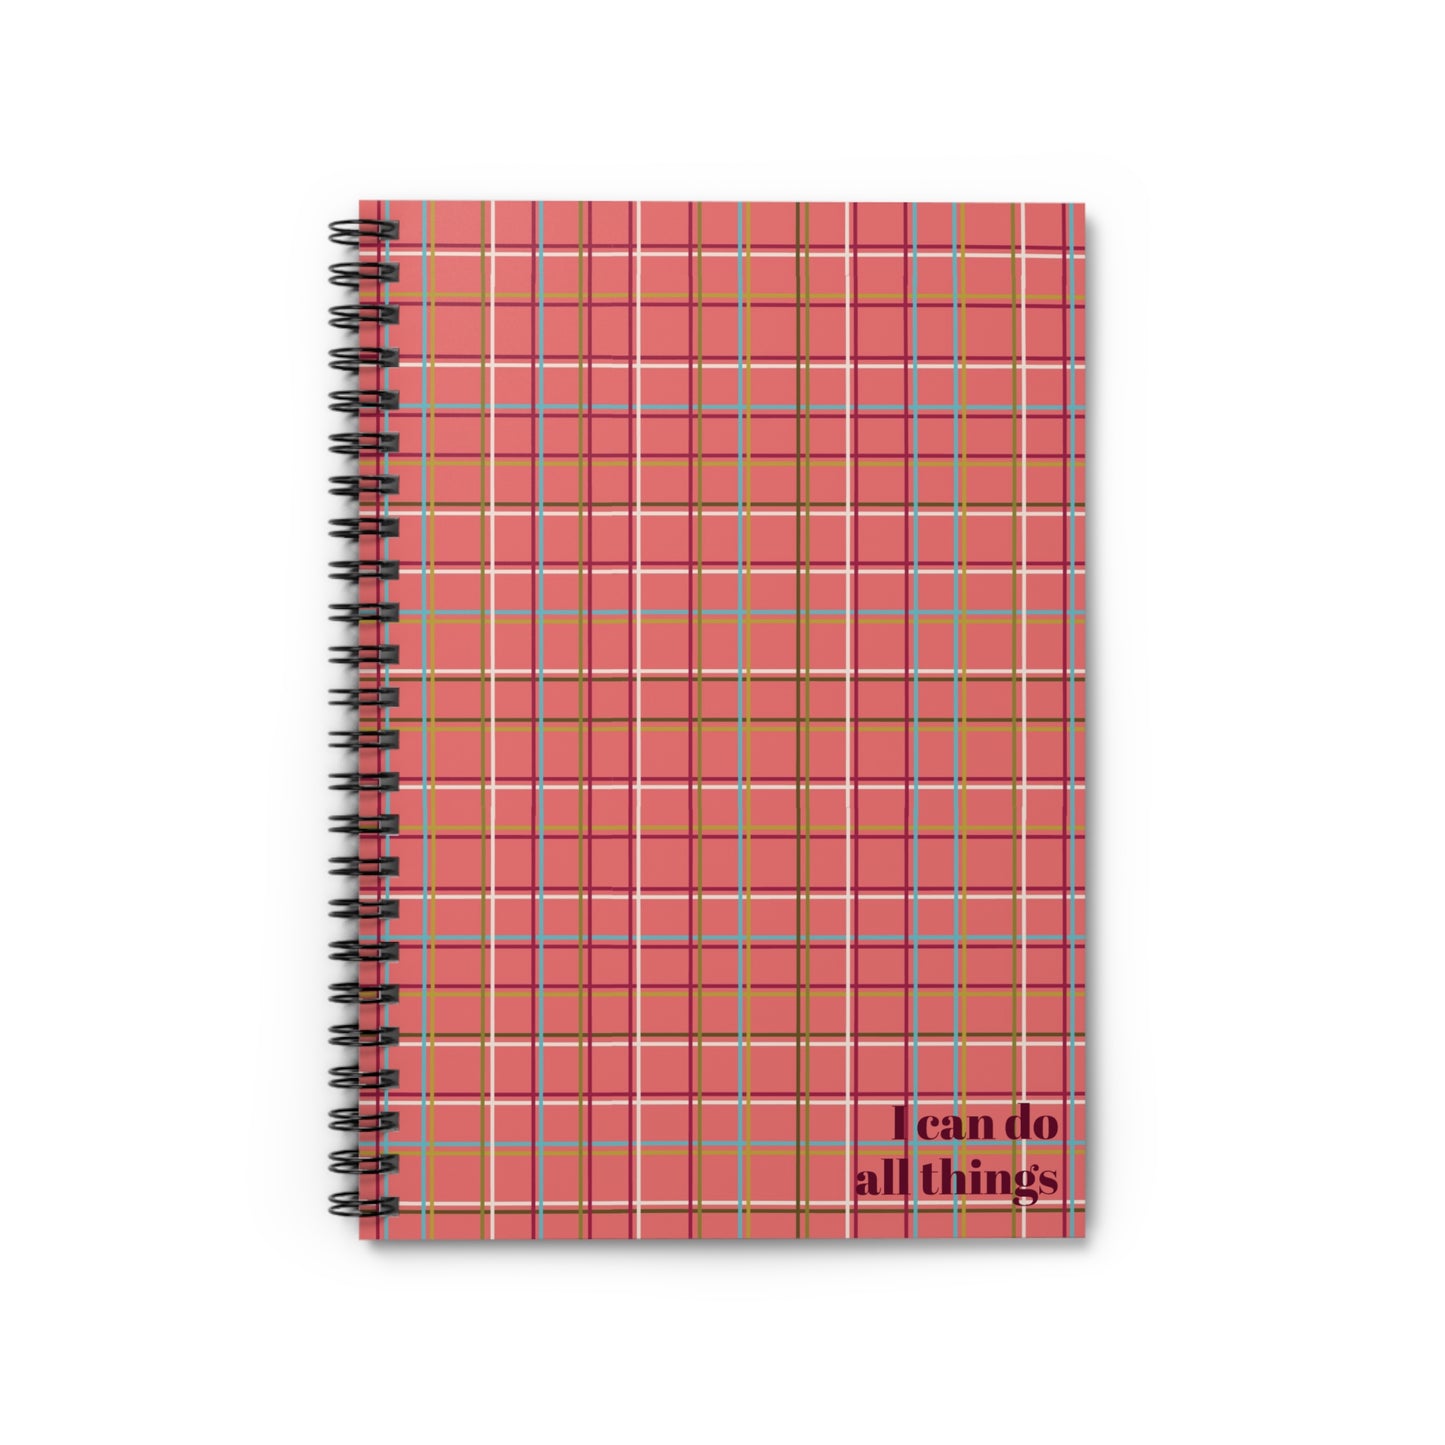 Fleeting Peach Plaid Notebook - Ruled Line "I can do all things"